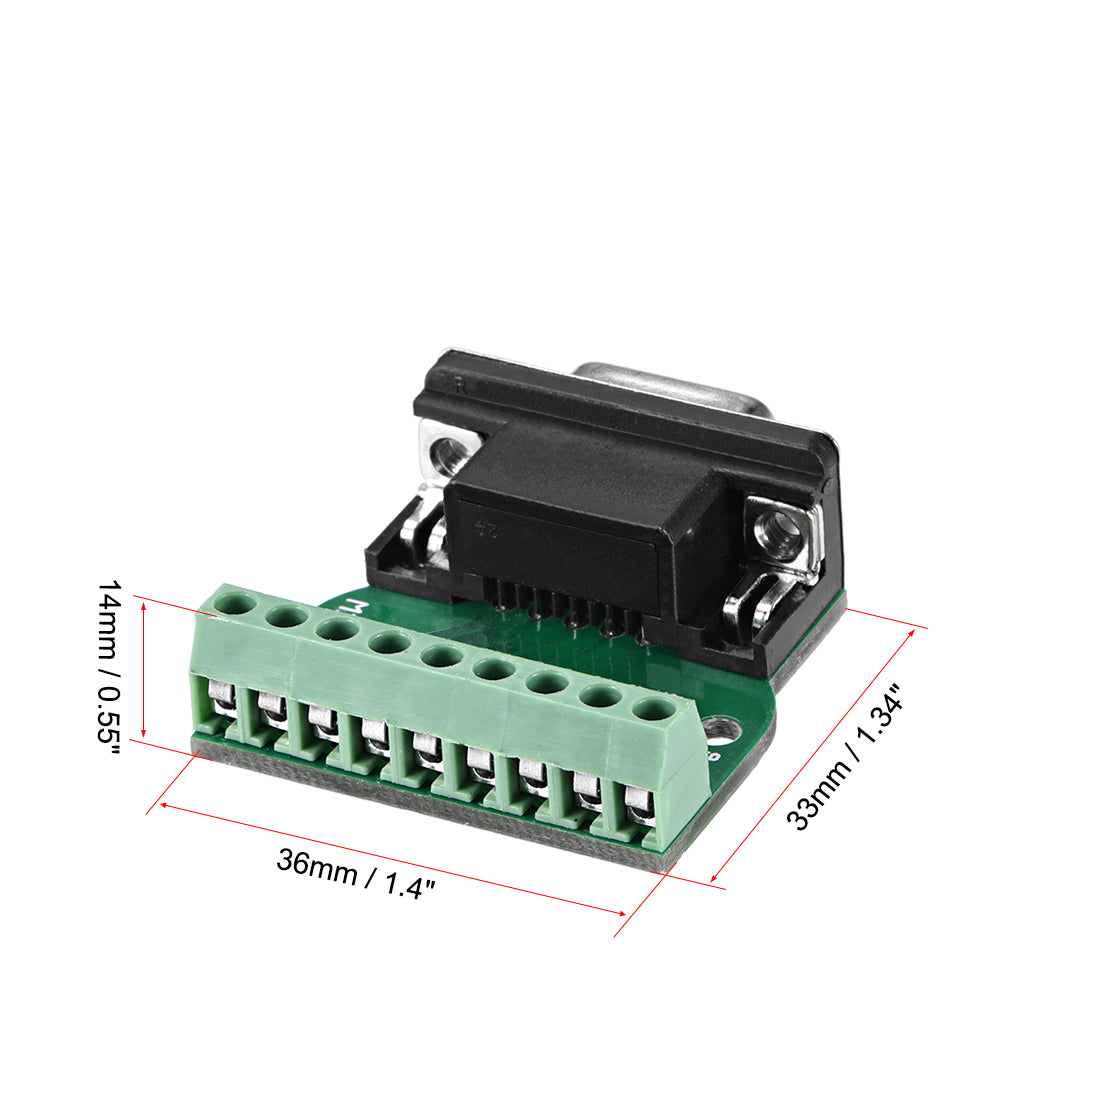 uxcell Uxcell D-sub DB9 Breakout Board Connector 9 Pin 2 Row Female RS232 Serial Port Solderless Terminal Block Adapter